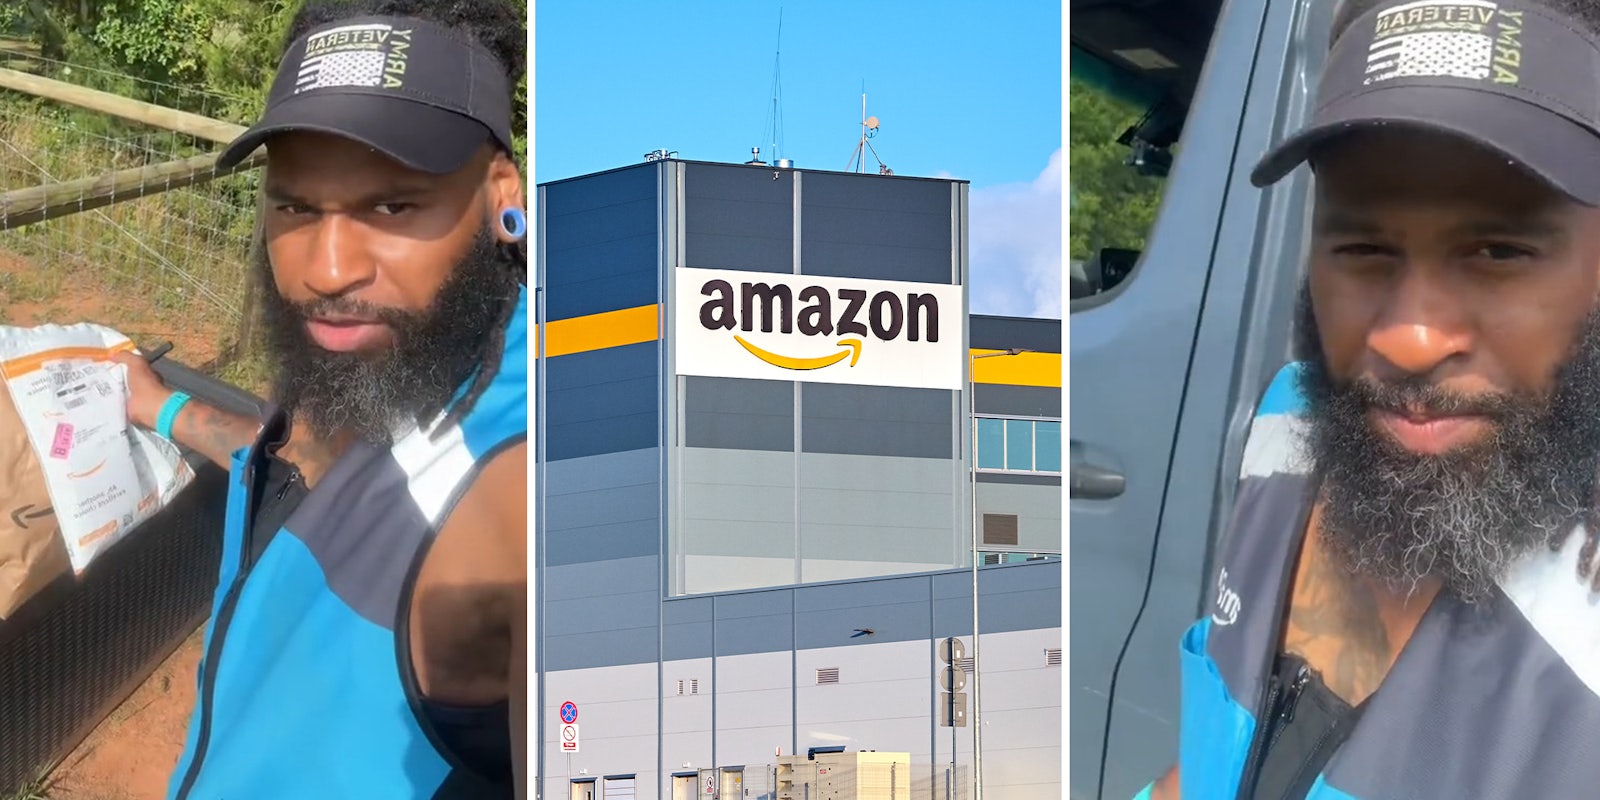 Amazon delivery driver issues PSA to customers who live in rural neighborhoods